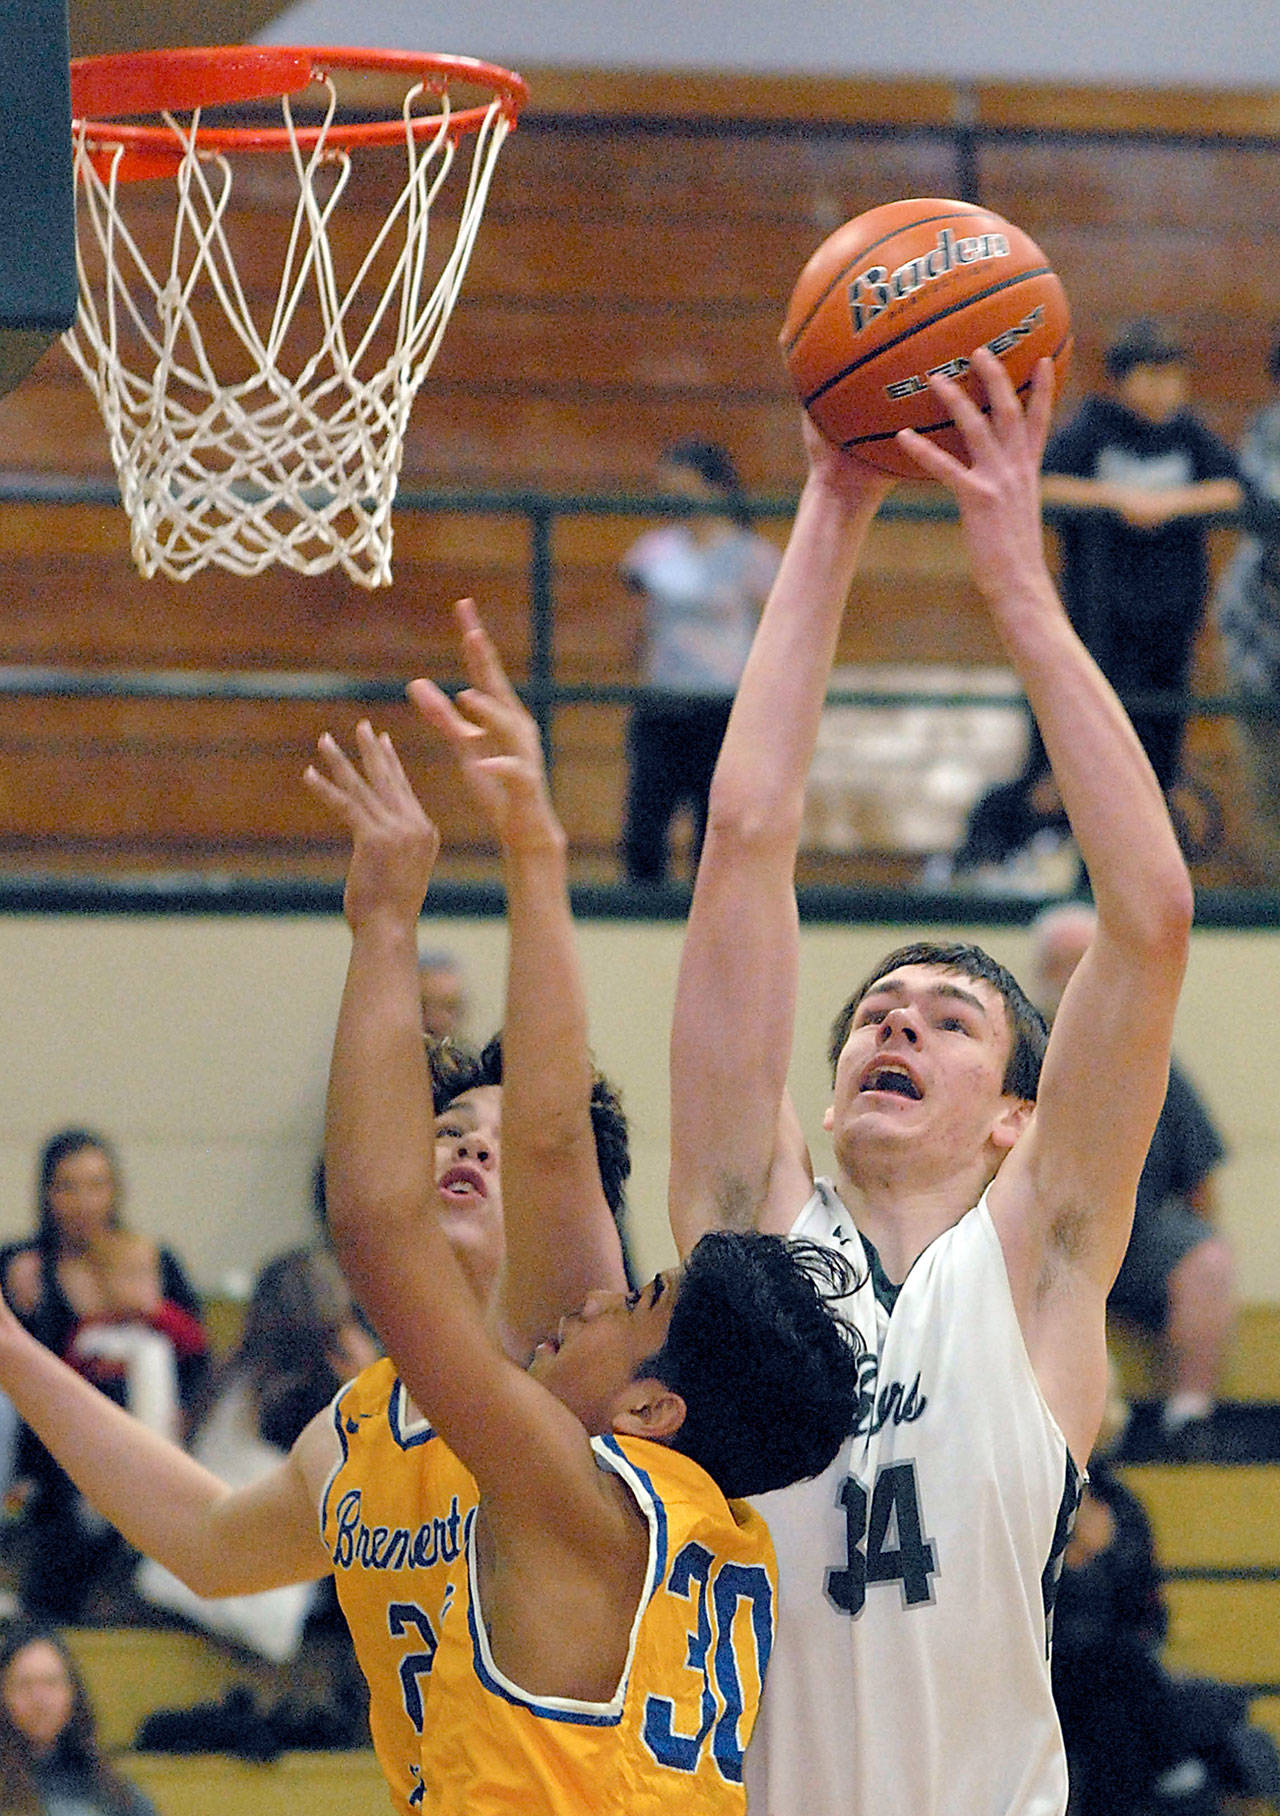 Keith Thorpe/Peninsula Daily News Port Angeles’ Liam Clark, right, takes aim at the basket over the defense of Bremerton’s Gavin King, left, and Kimo Retome during their Jan. 16 game at Port Angeles High School.